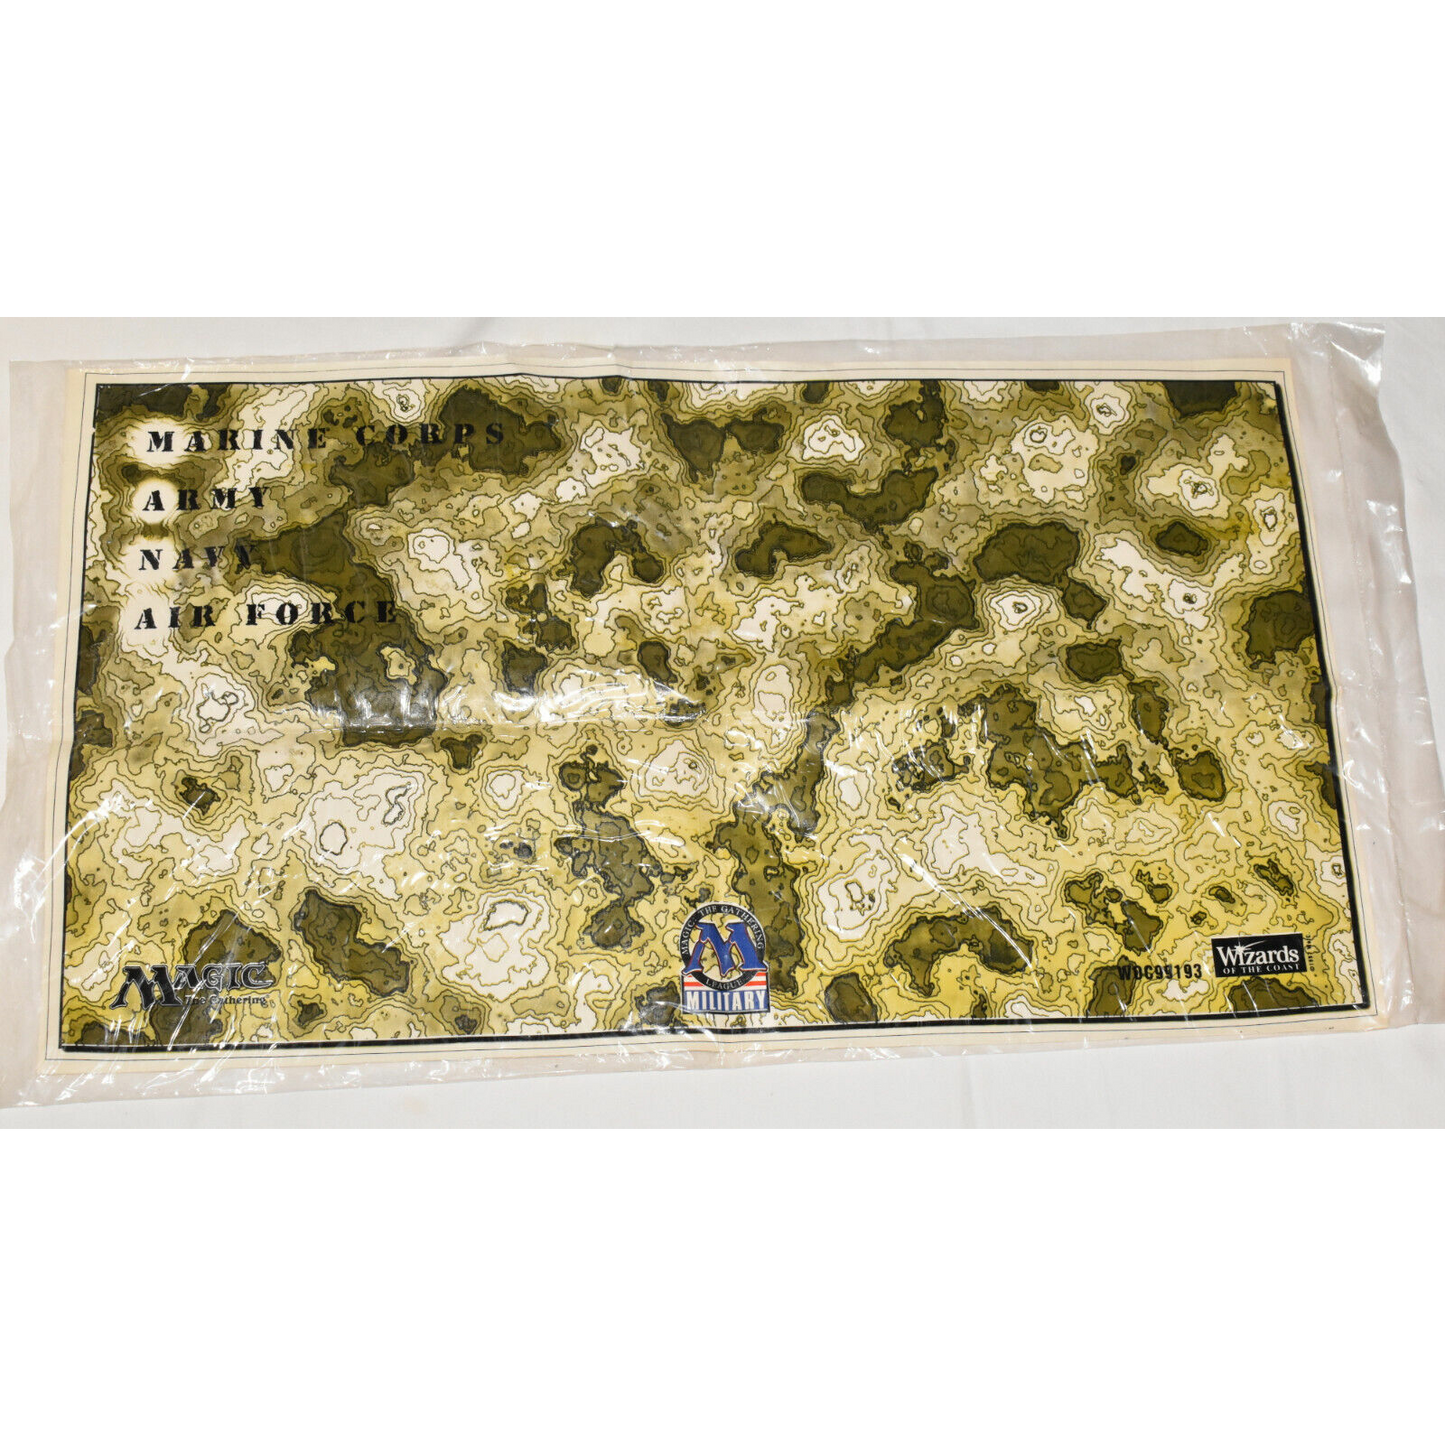 Magic The Gathering Military League Canvas Playmat Marines Army Navy Air Force